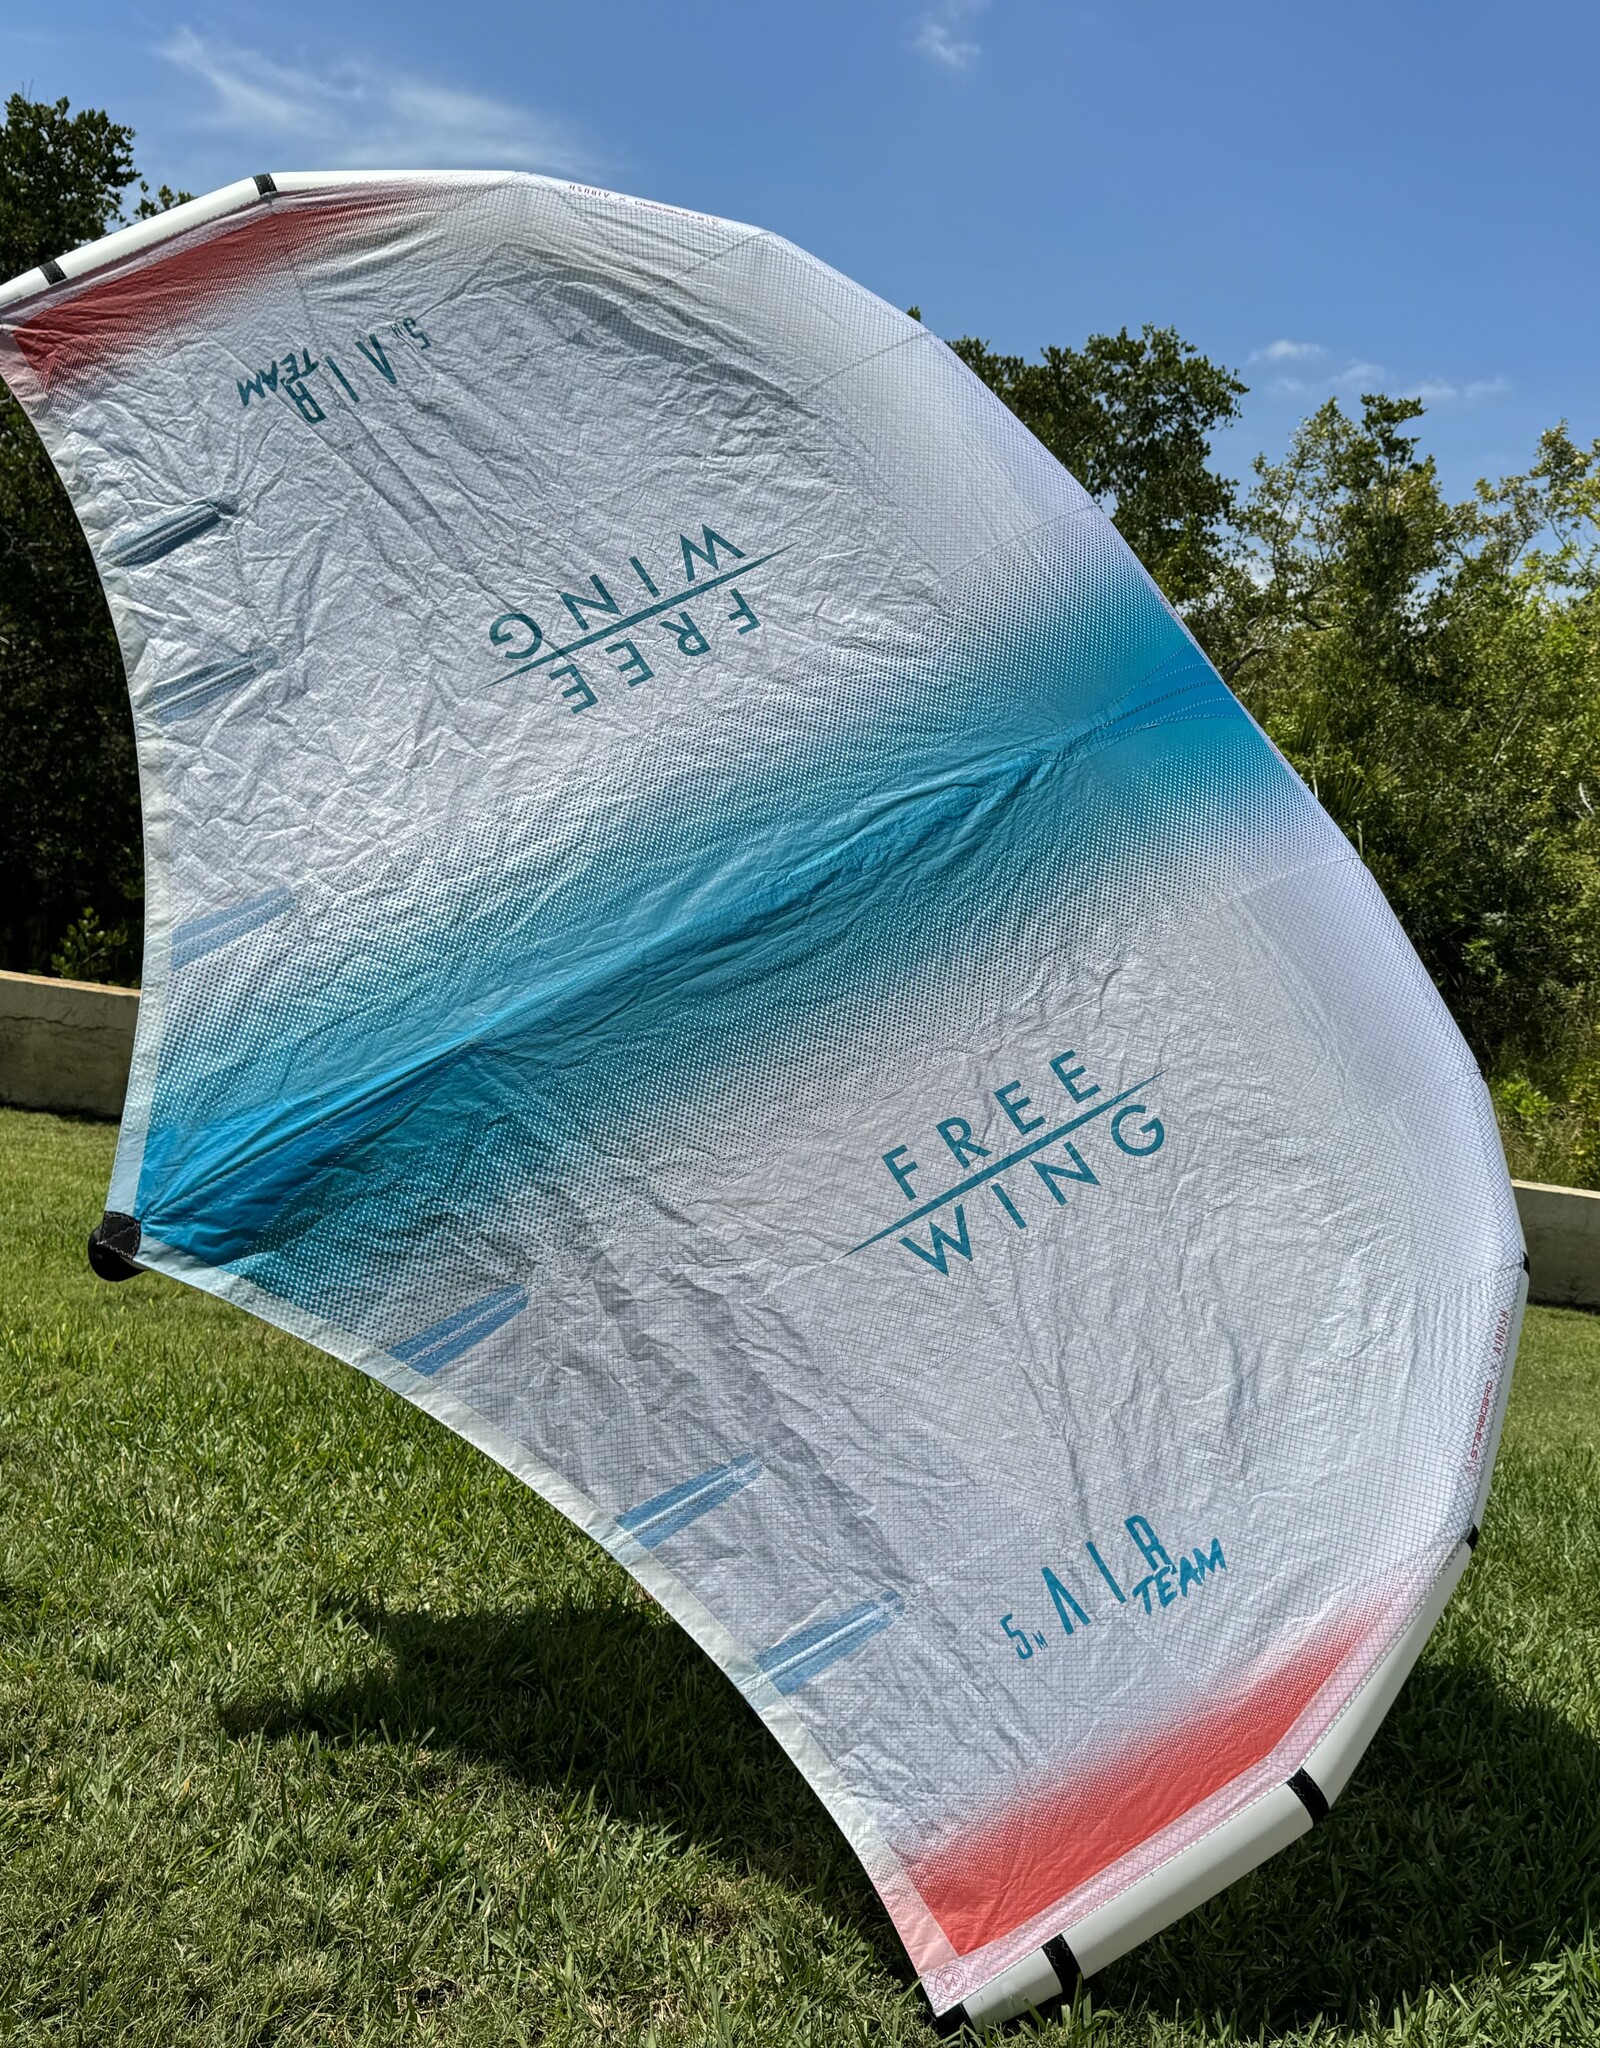 FREEWING FREEWING AIR TEAM 3M ULTRA X CANOPY AND HO'OKIPA AIRFRAME